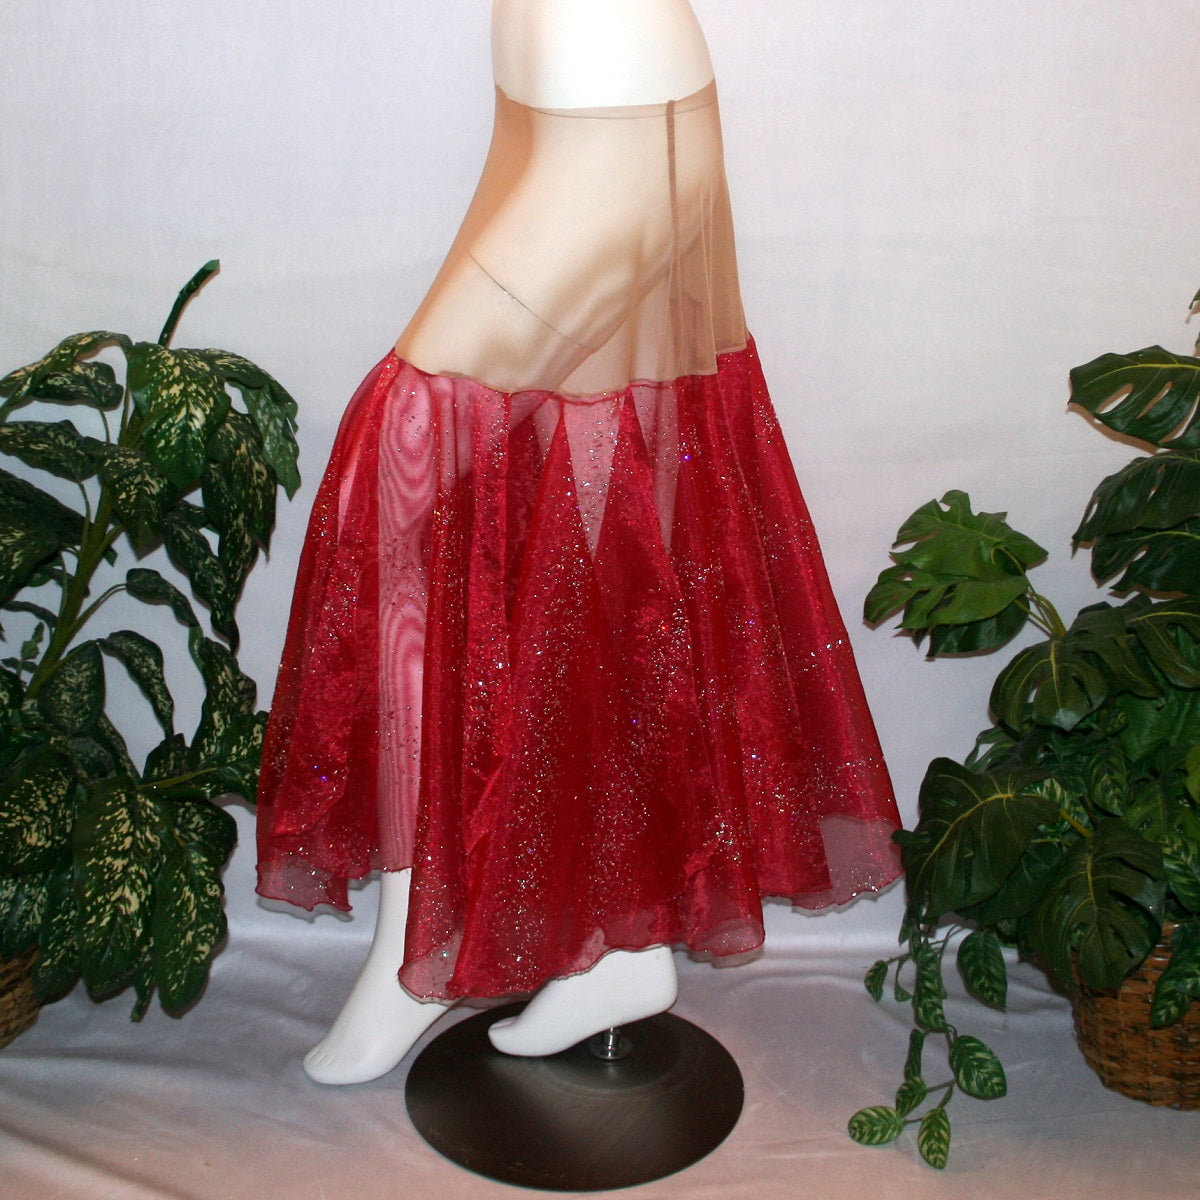 side view of Red ballroom skirt created on a nude illusion hip band of yards of scarlette red panels with silver & pearlized flecking, very cool & showy!